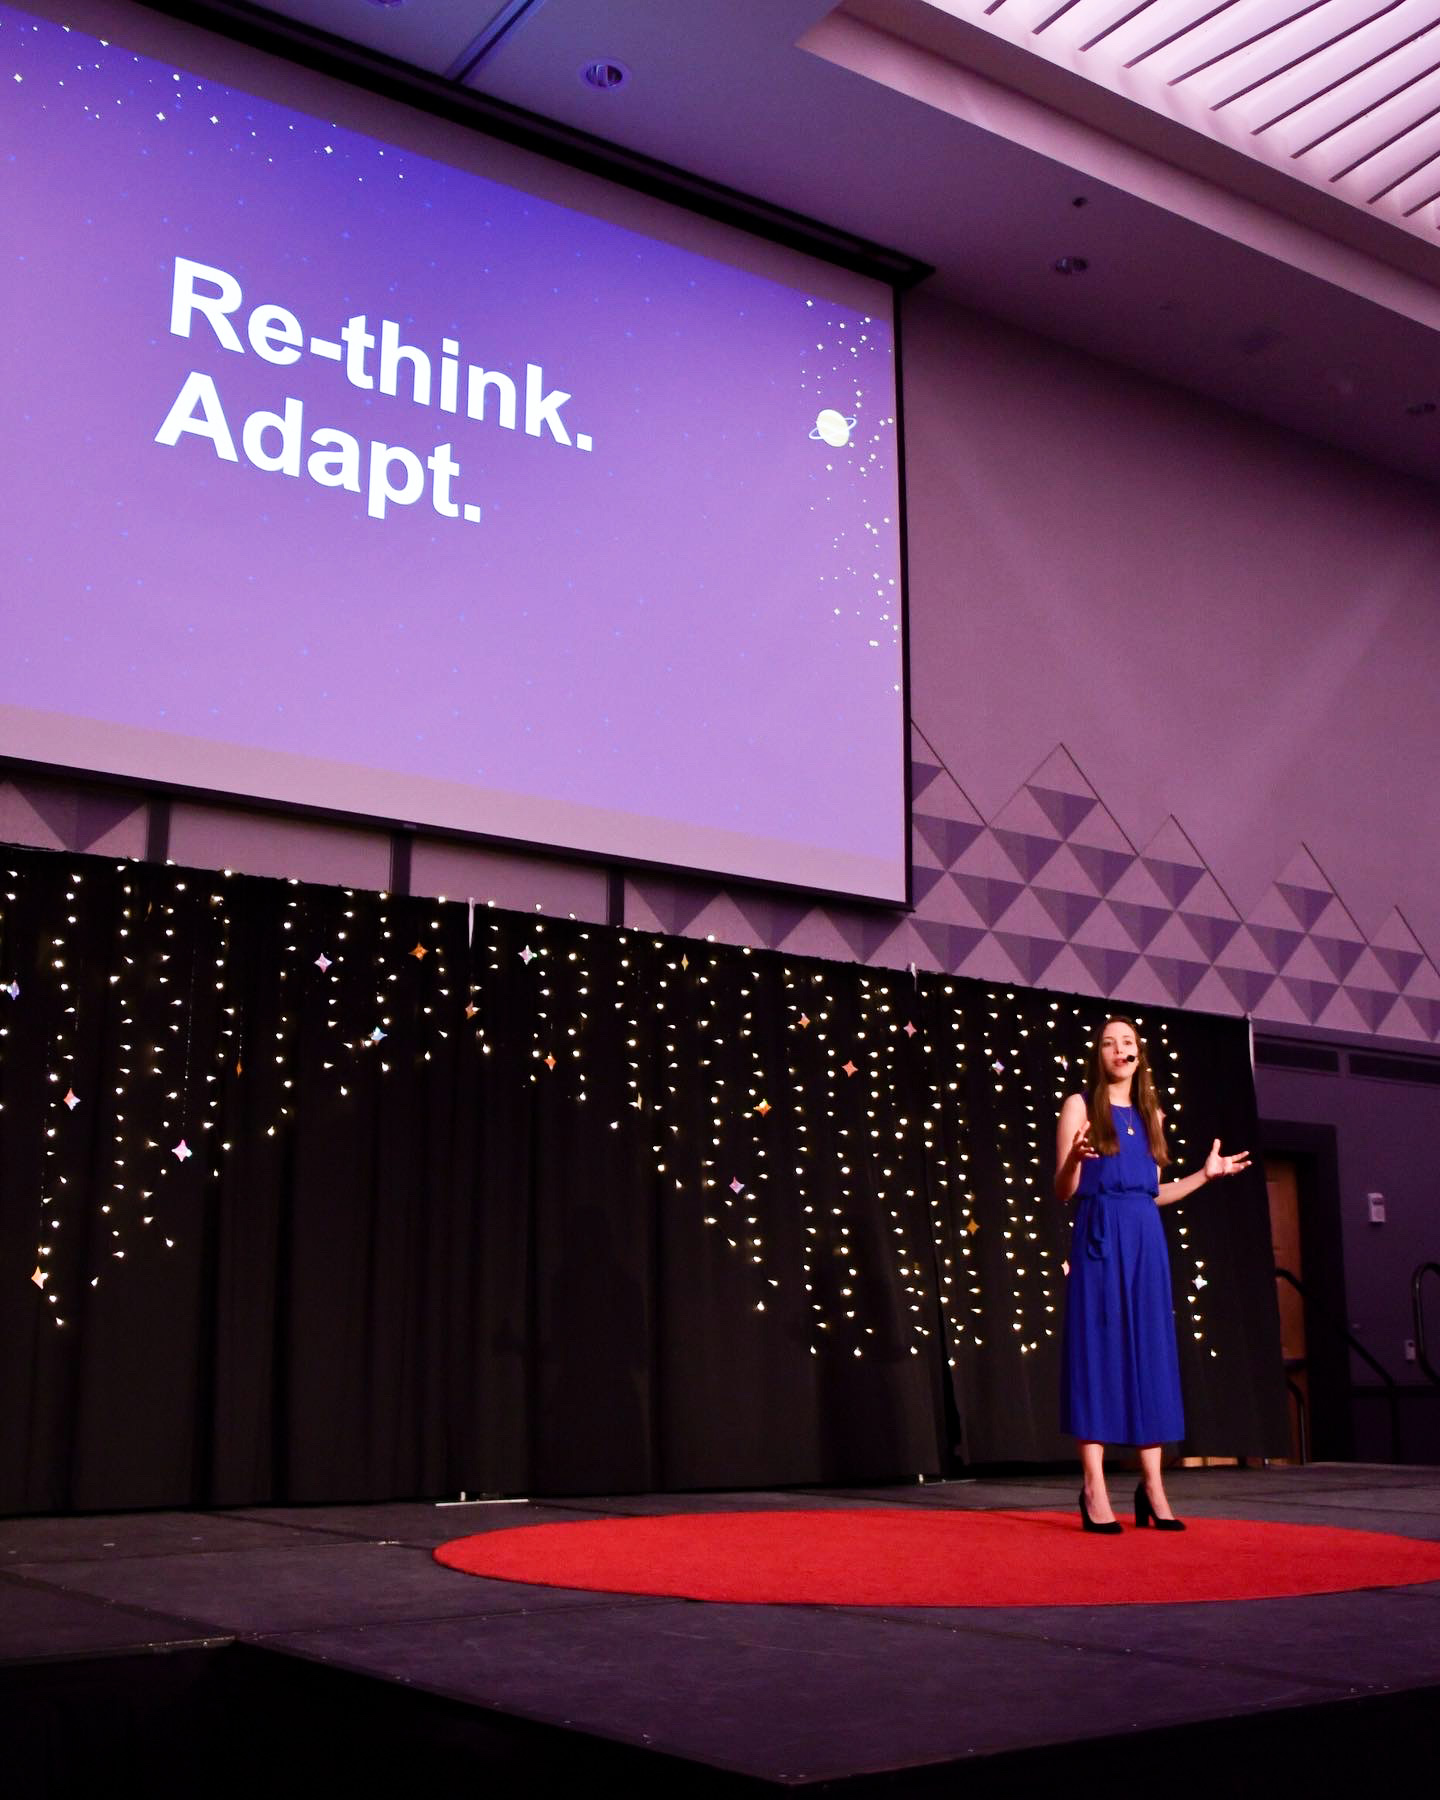 Daniela stands on a darkened stage within a red circle of carpet while giving a TED Talk. Above her head is a large presentation screen displaying bold white letters reading: “Re-think. Adapt.”